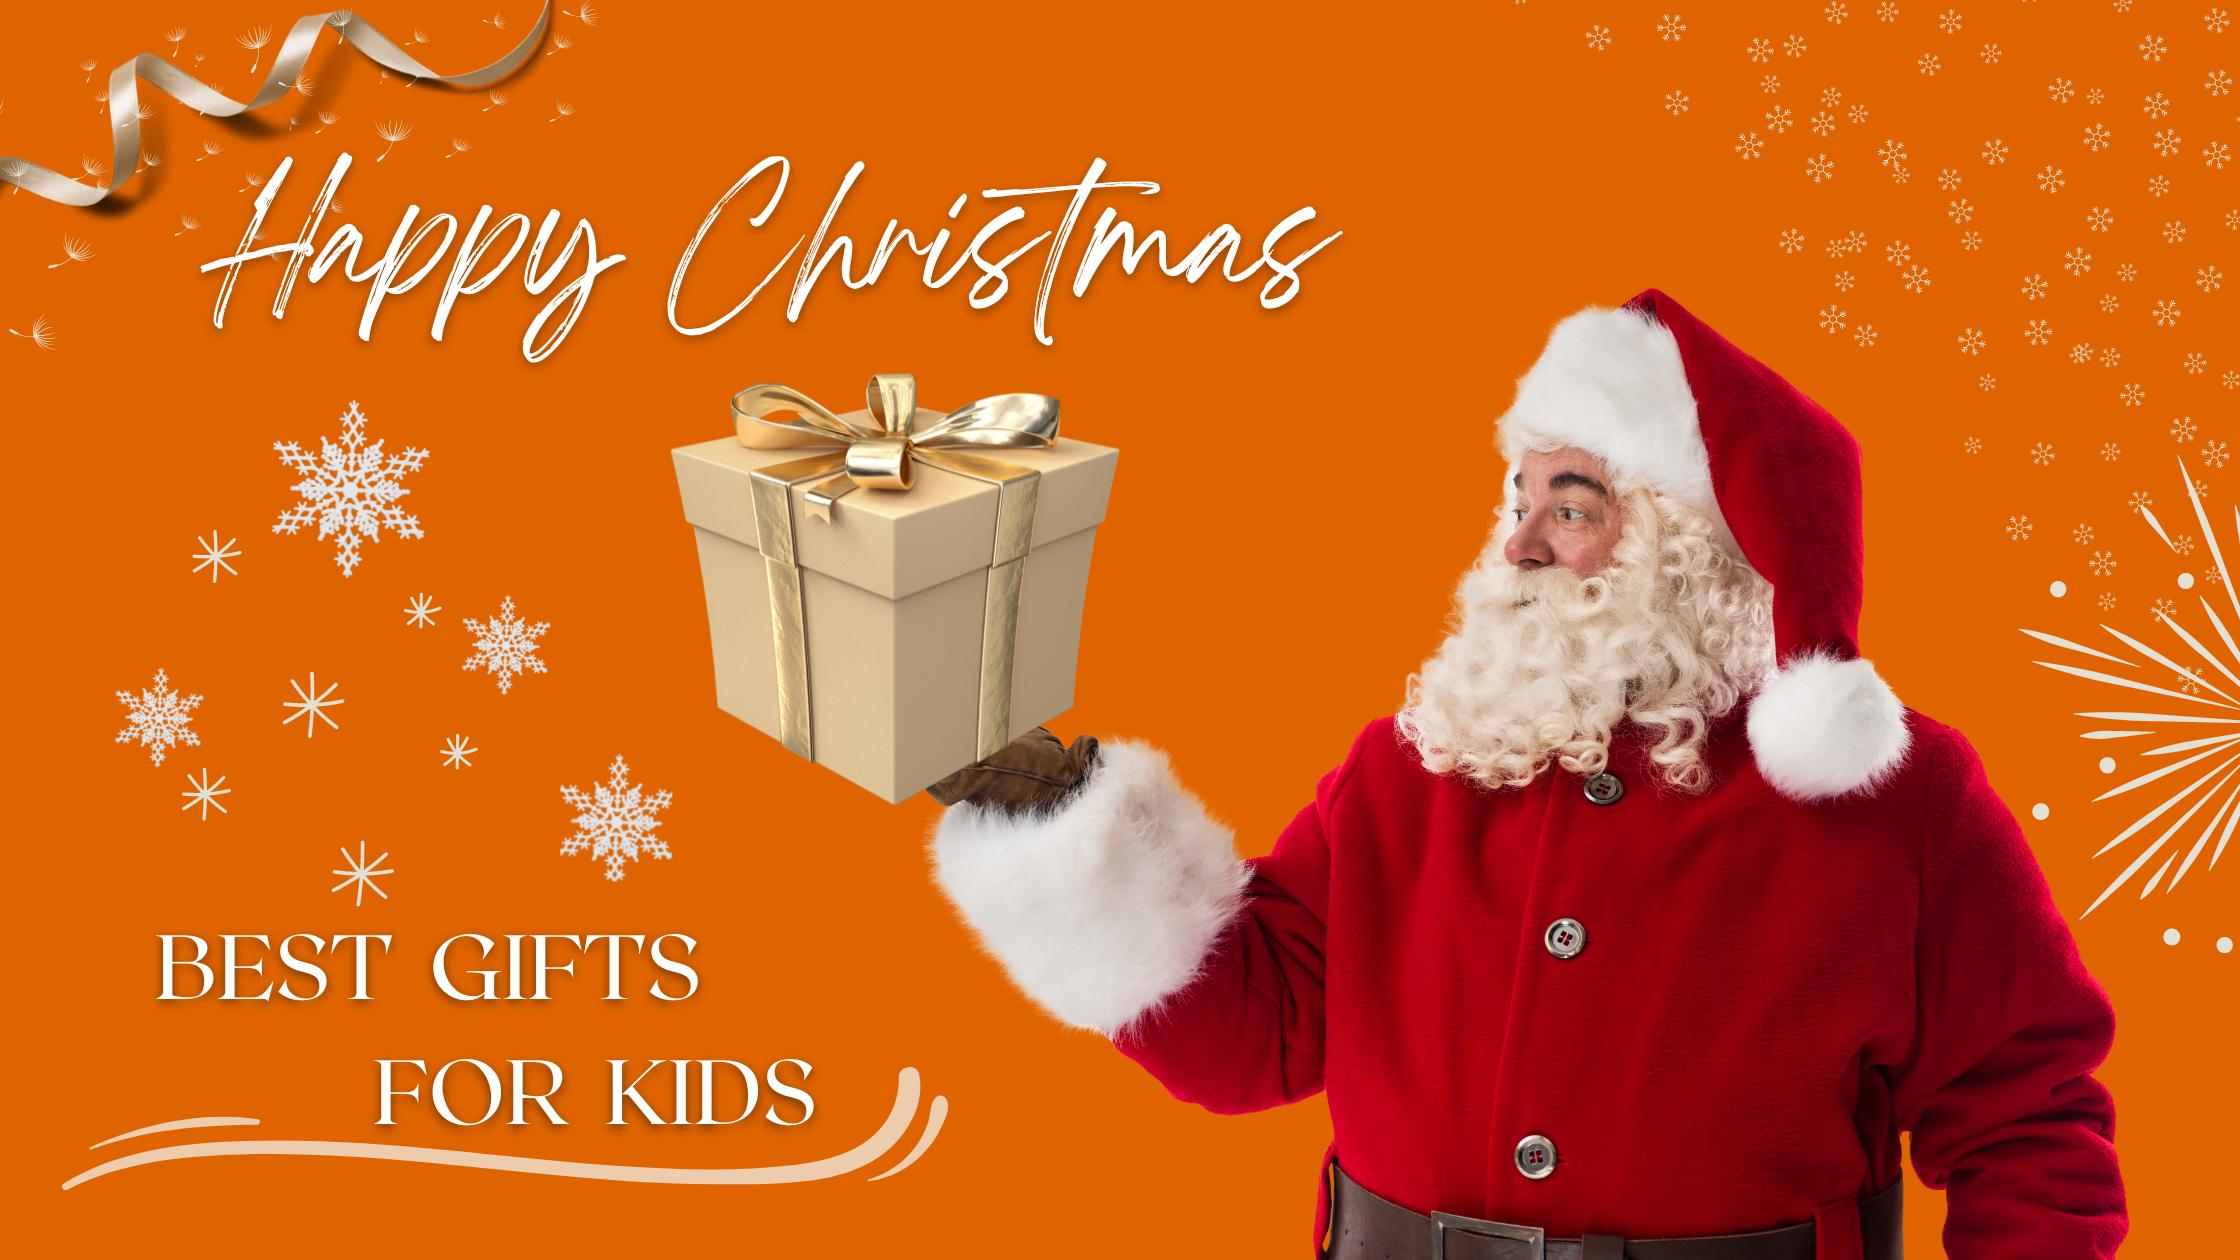 Christmas Gifts For Kids That Are Thoughtful And Useful